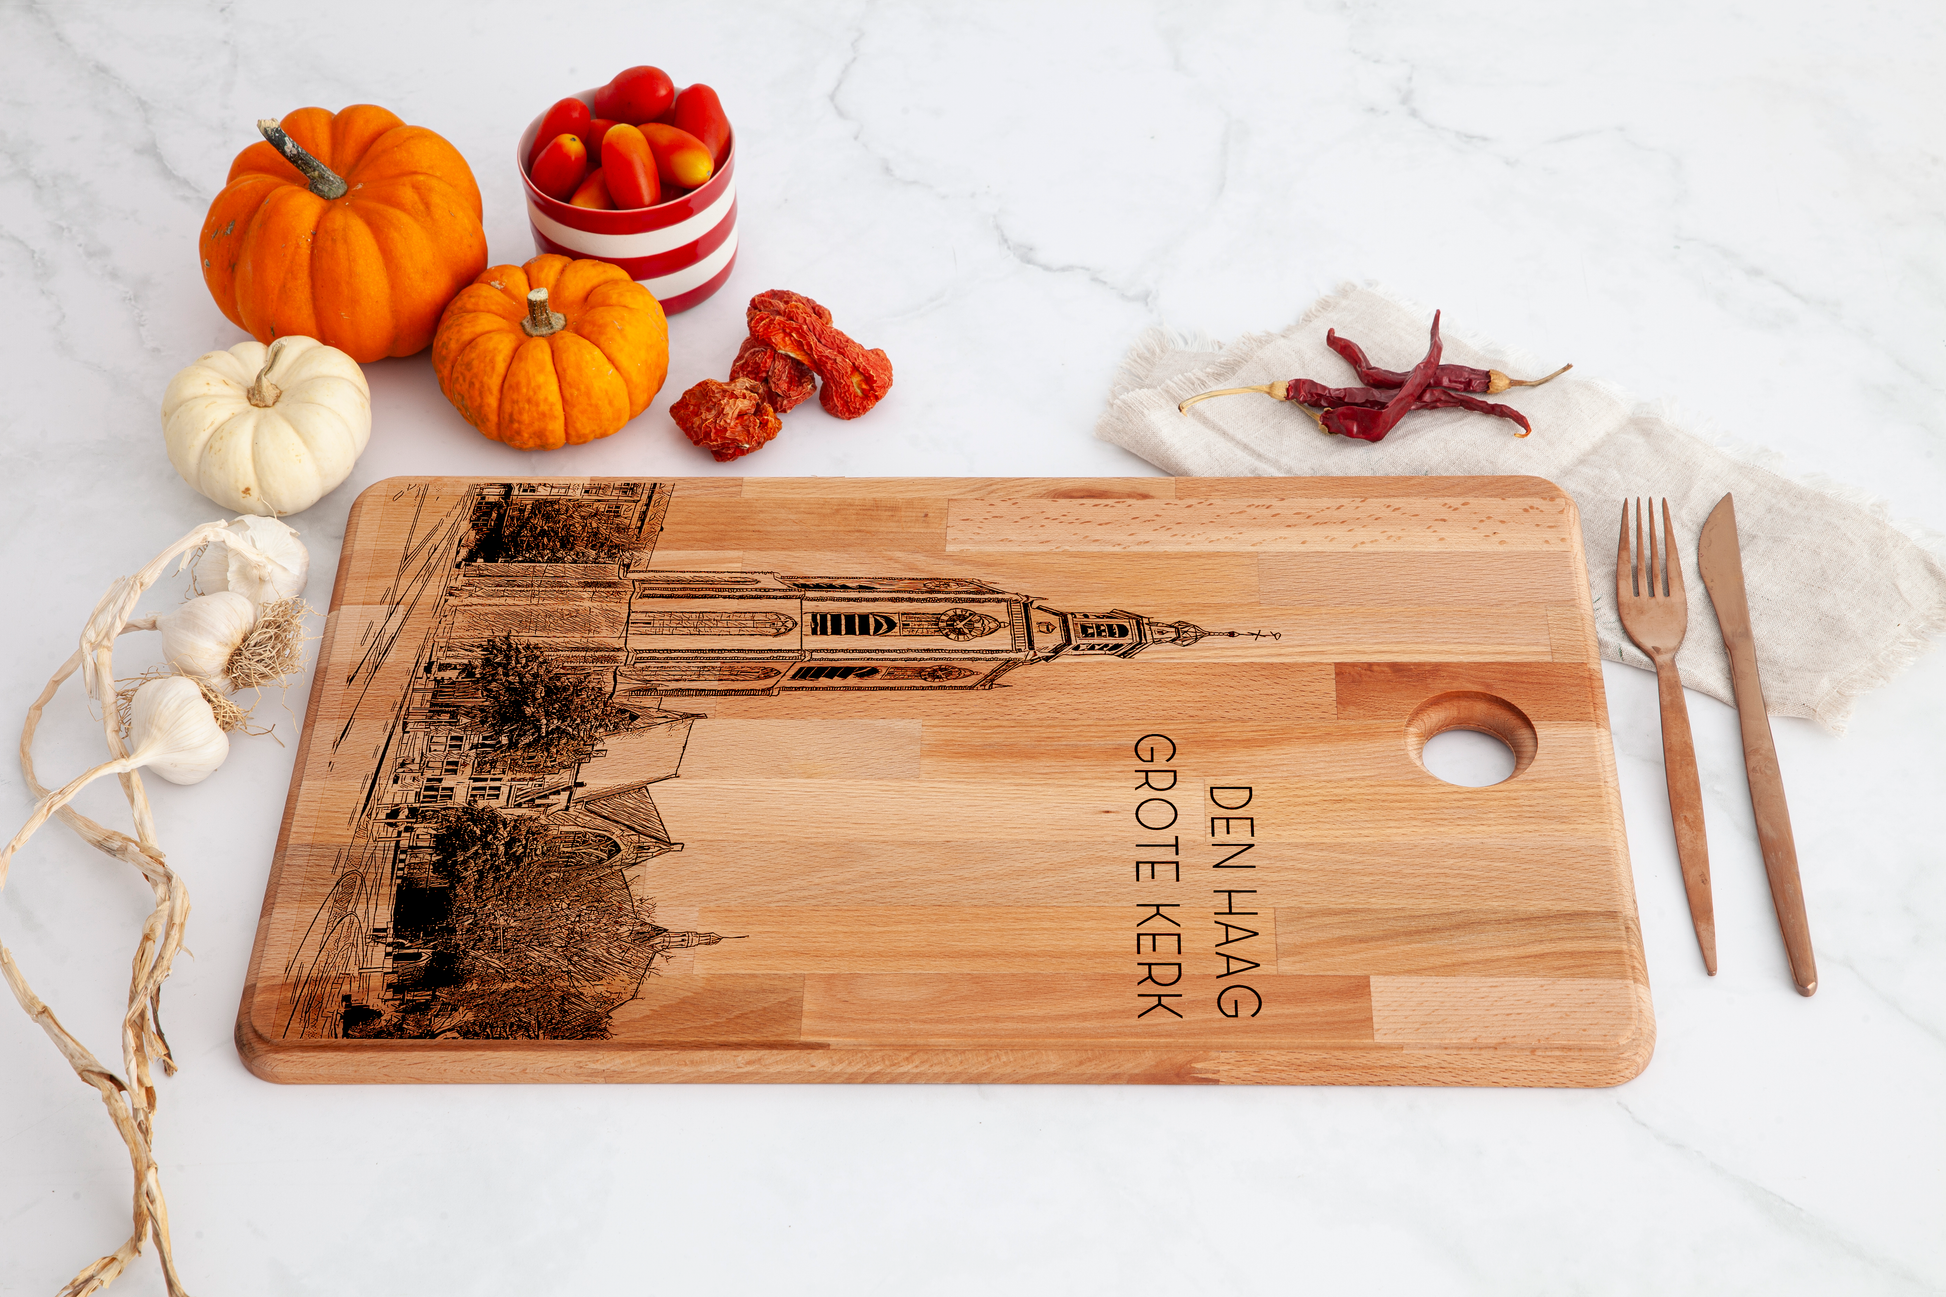 Den Haag, Grote Kerk, cutting board, with knife